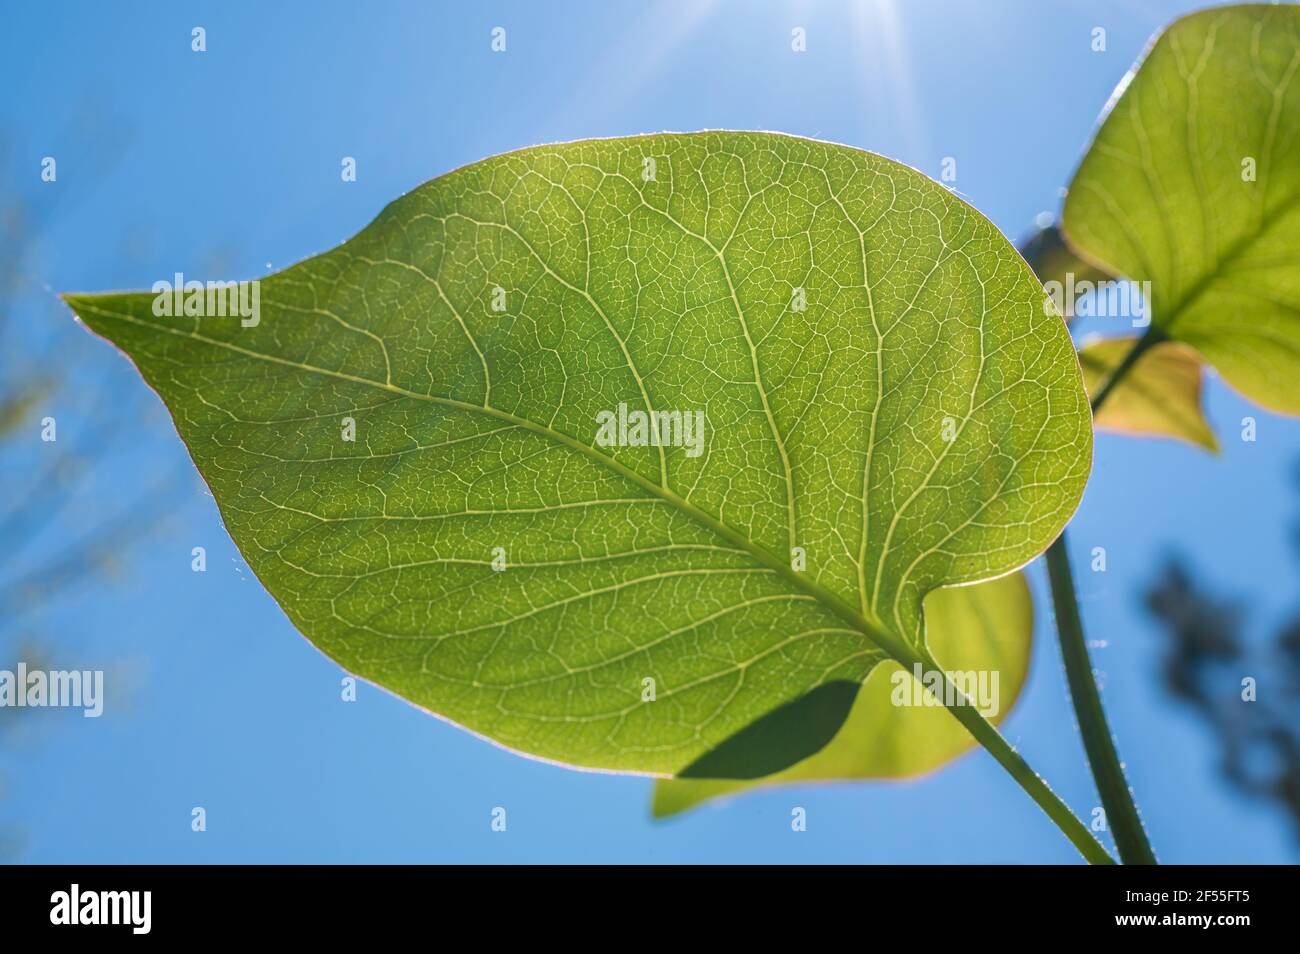 Lush green leaf against a blue sky in the sunshine Stock Photo